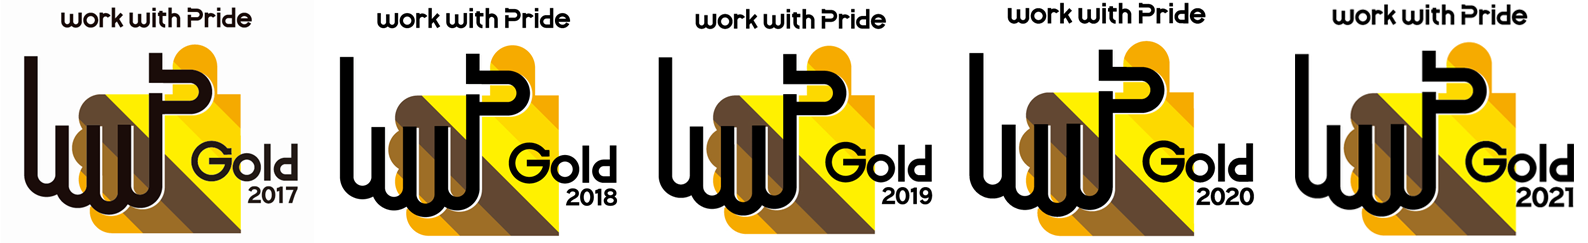 Work With Pride Gold2021